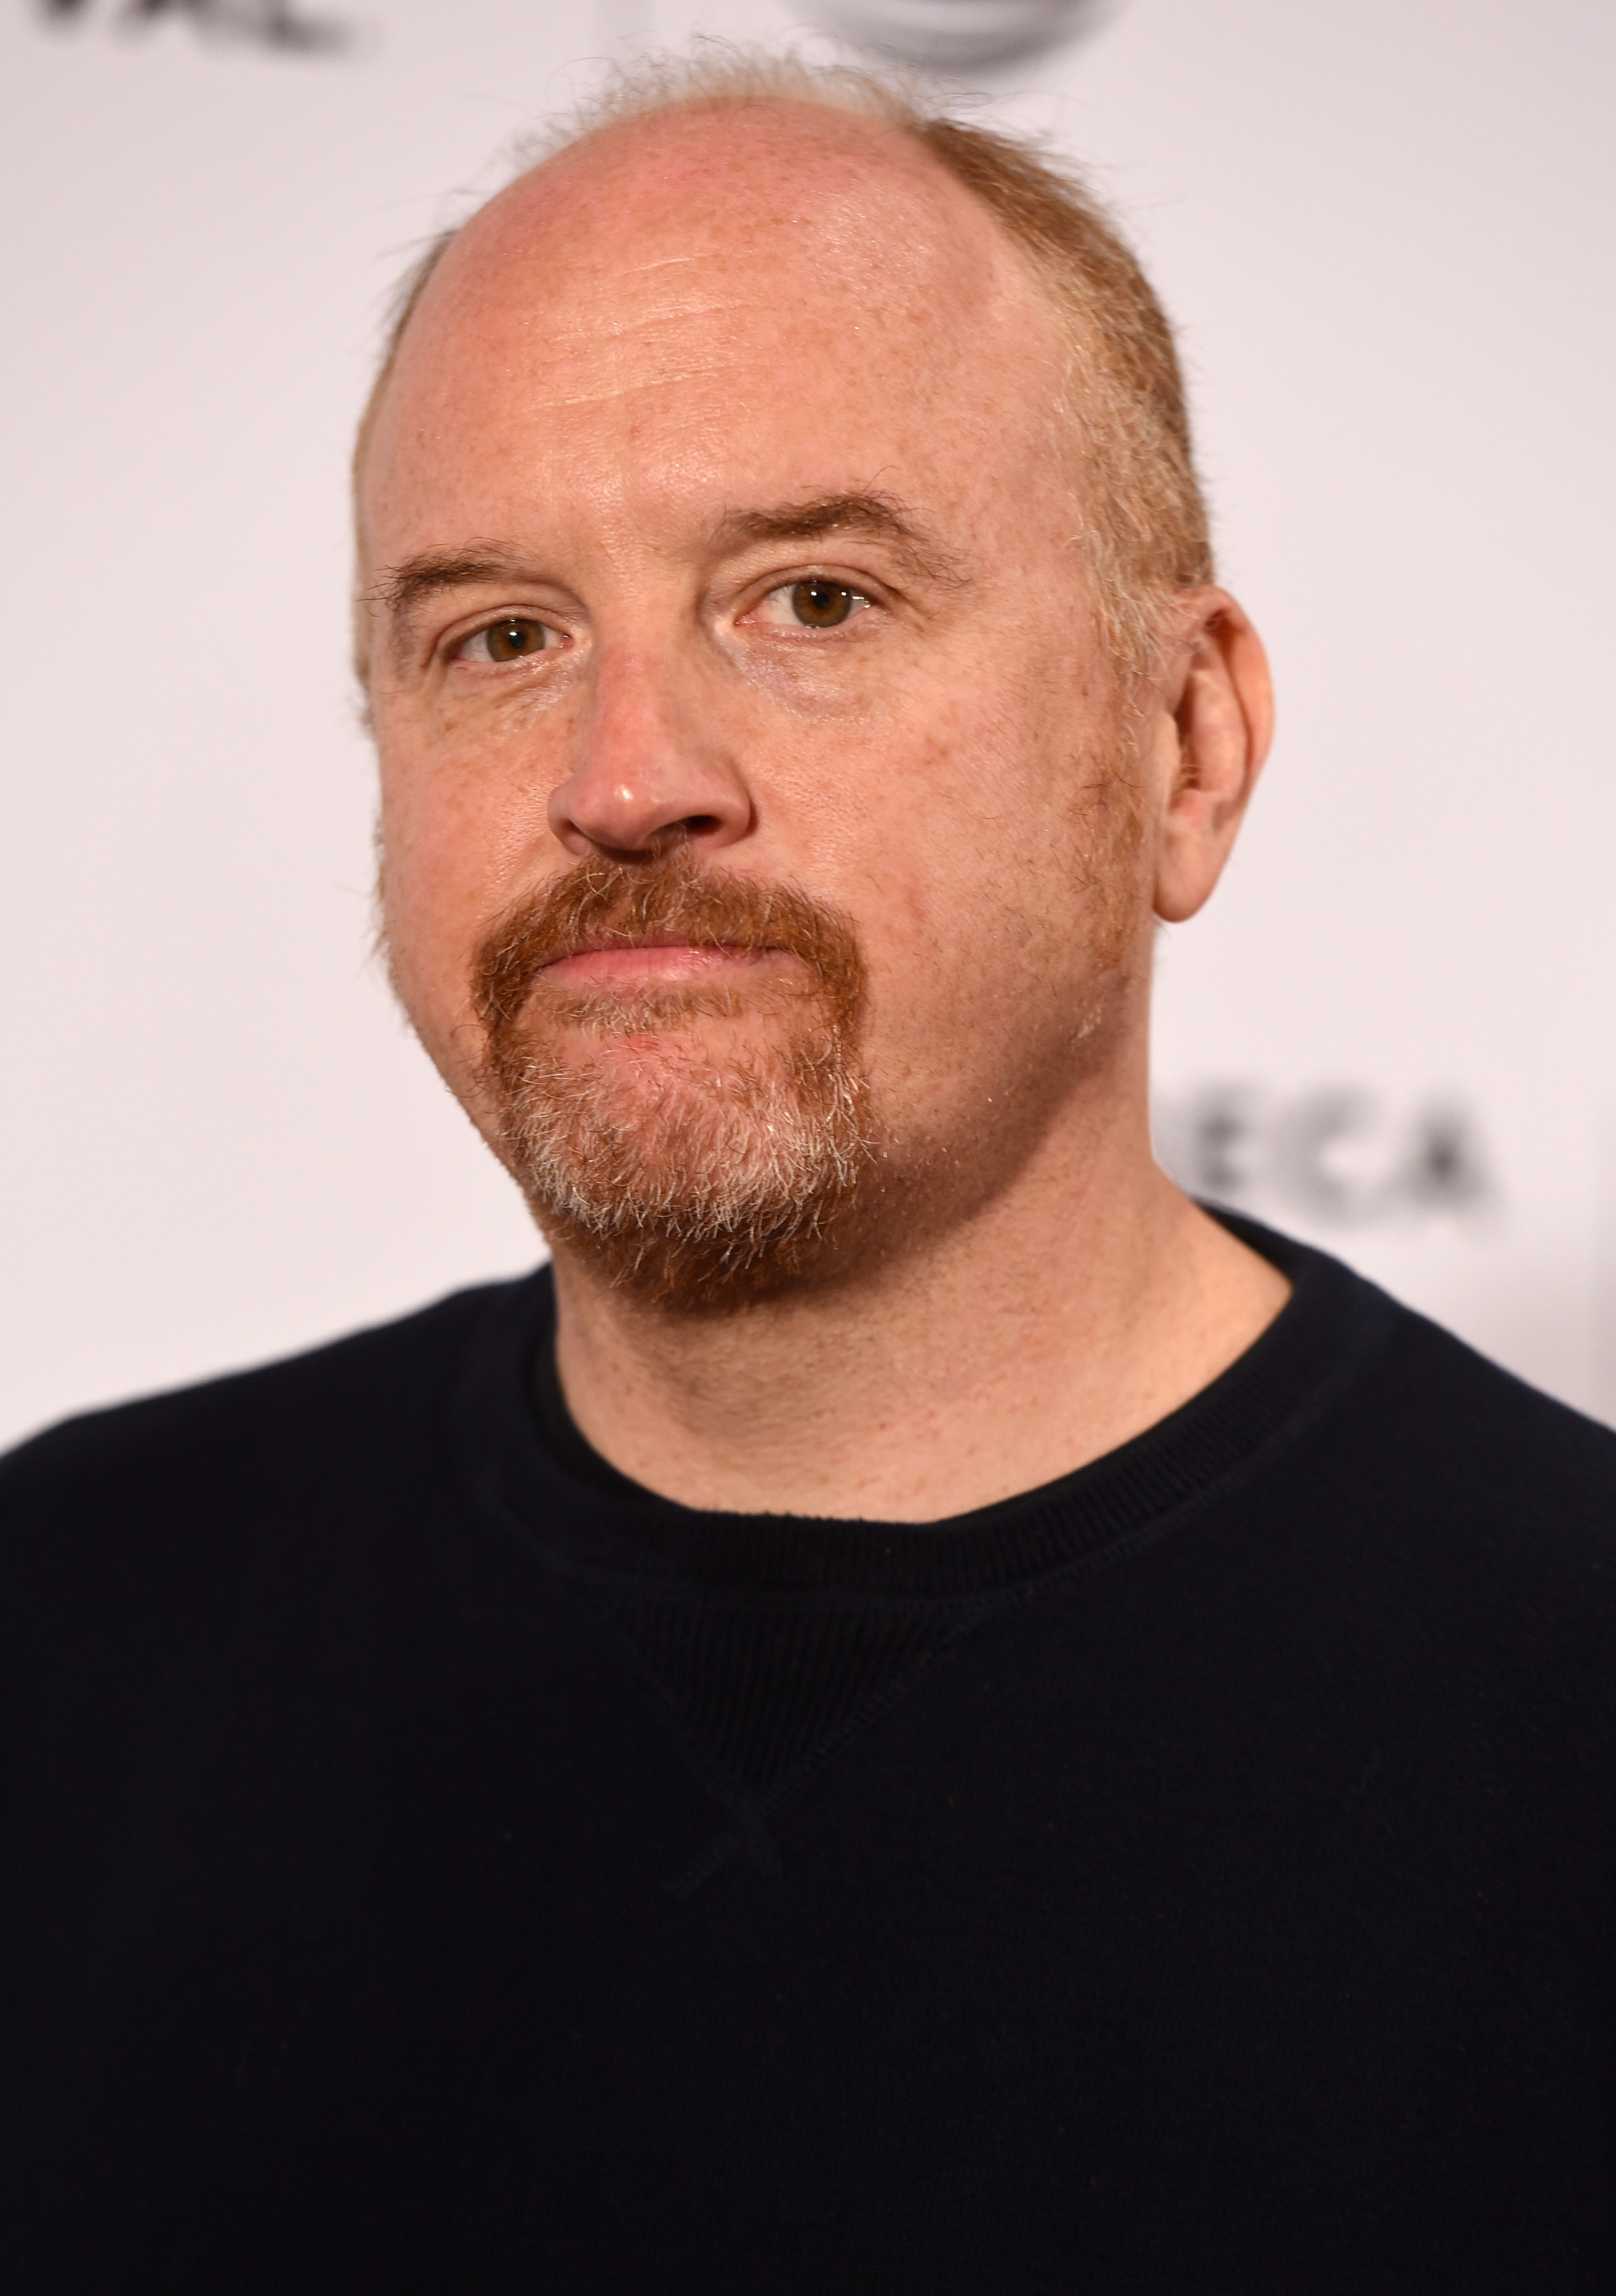 Louis C.K. attends the "Check It" Premiere during the 2016 Tribeca Film Festival at Chelsea Bow Tie Cinemas on April 16, 2016 in New York City. (Noam Galai—Tribeca Film Festival/Getty Images)